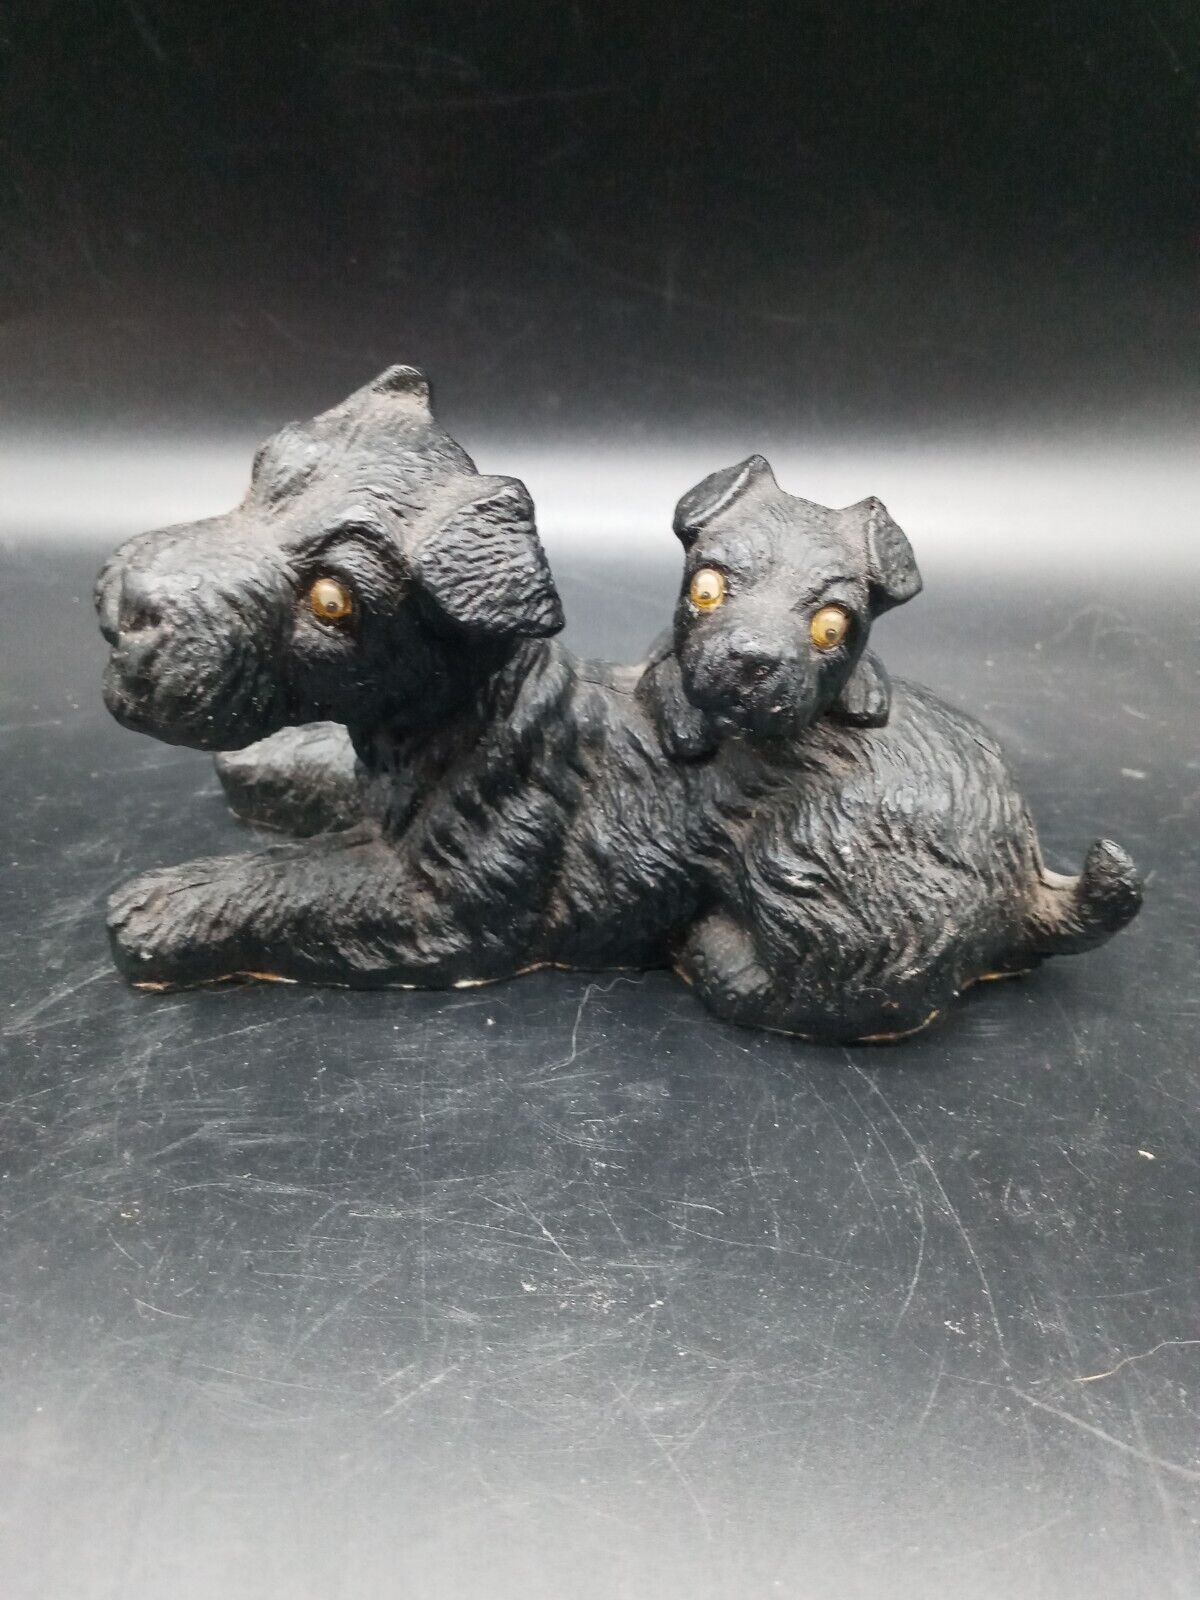 VTG Coal Carved Schnauzer Dogs Googly Eyes Mom & Pup